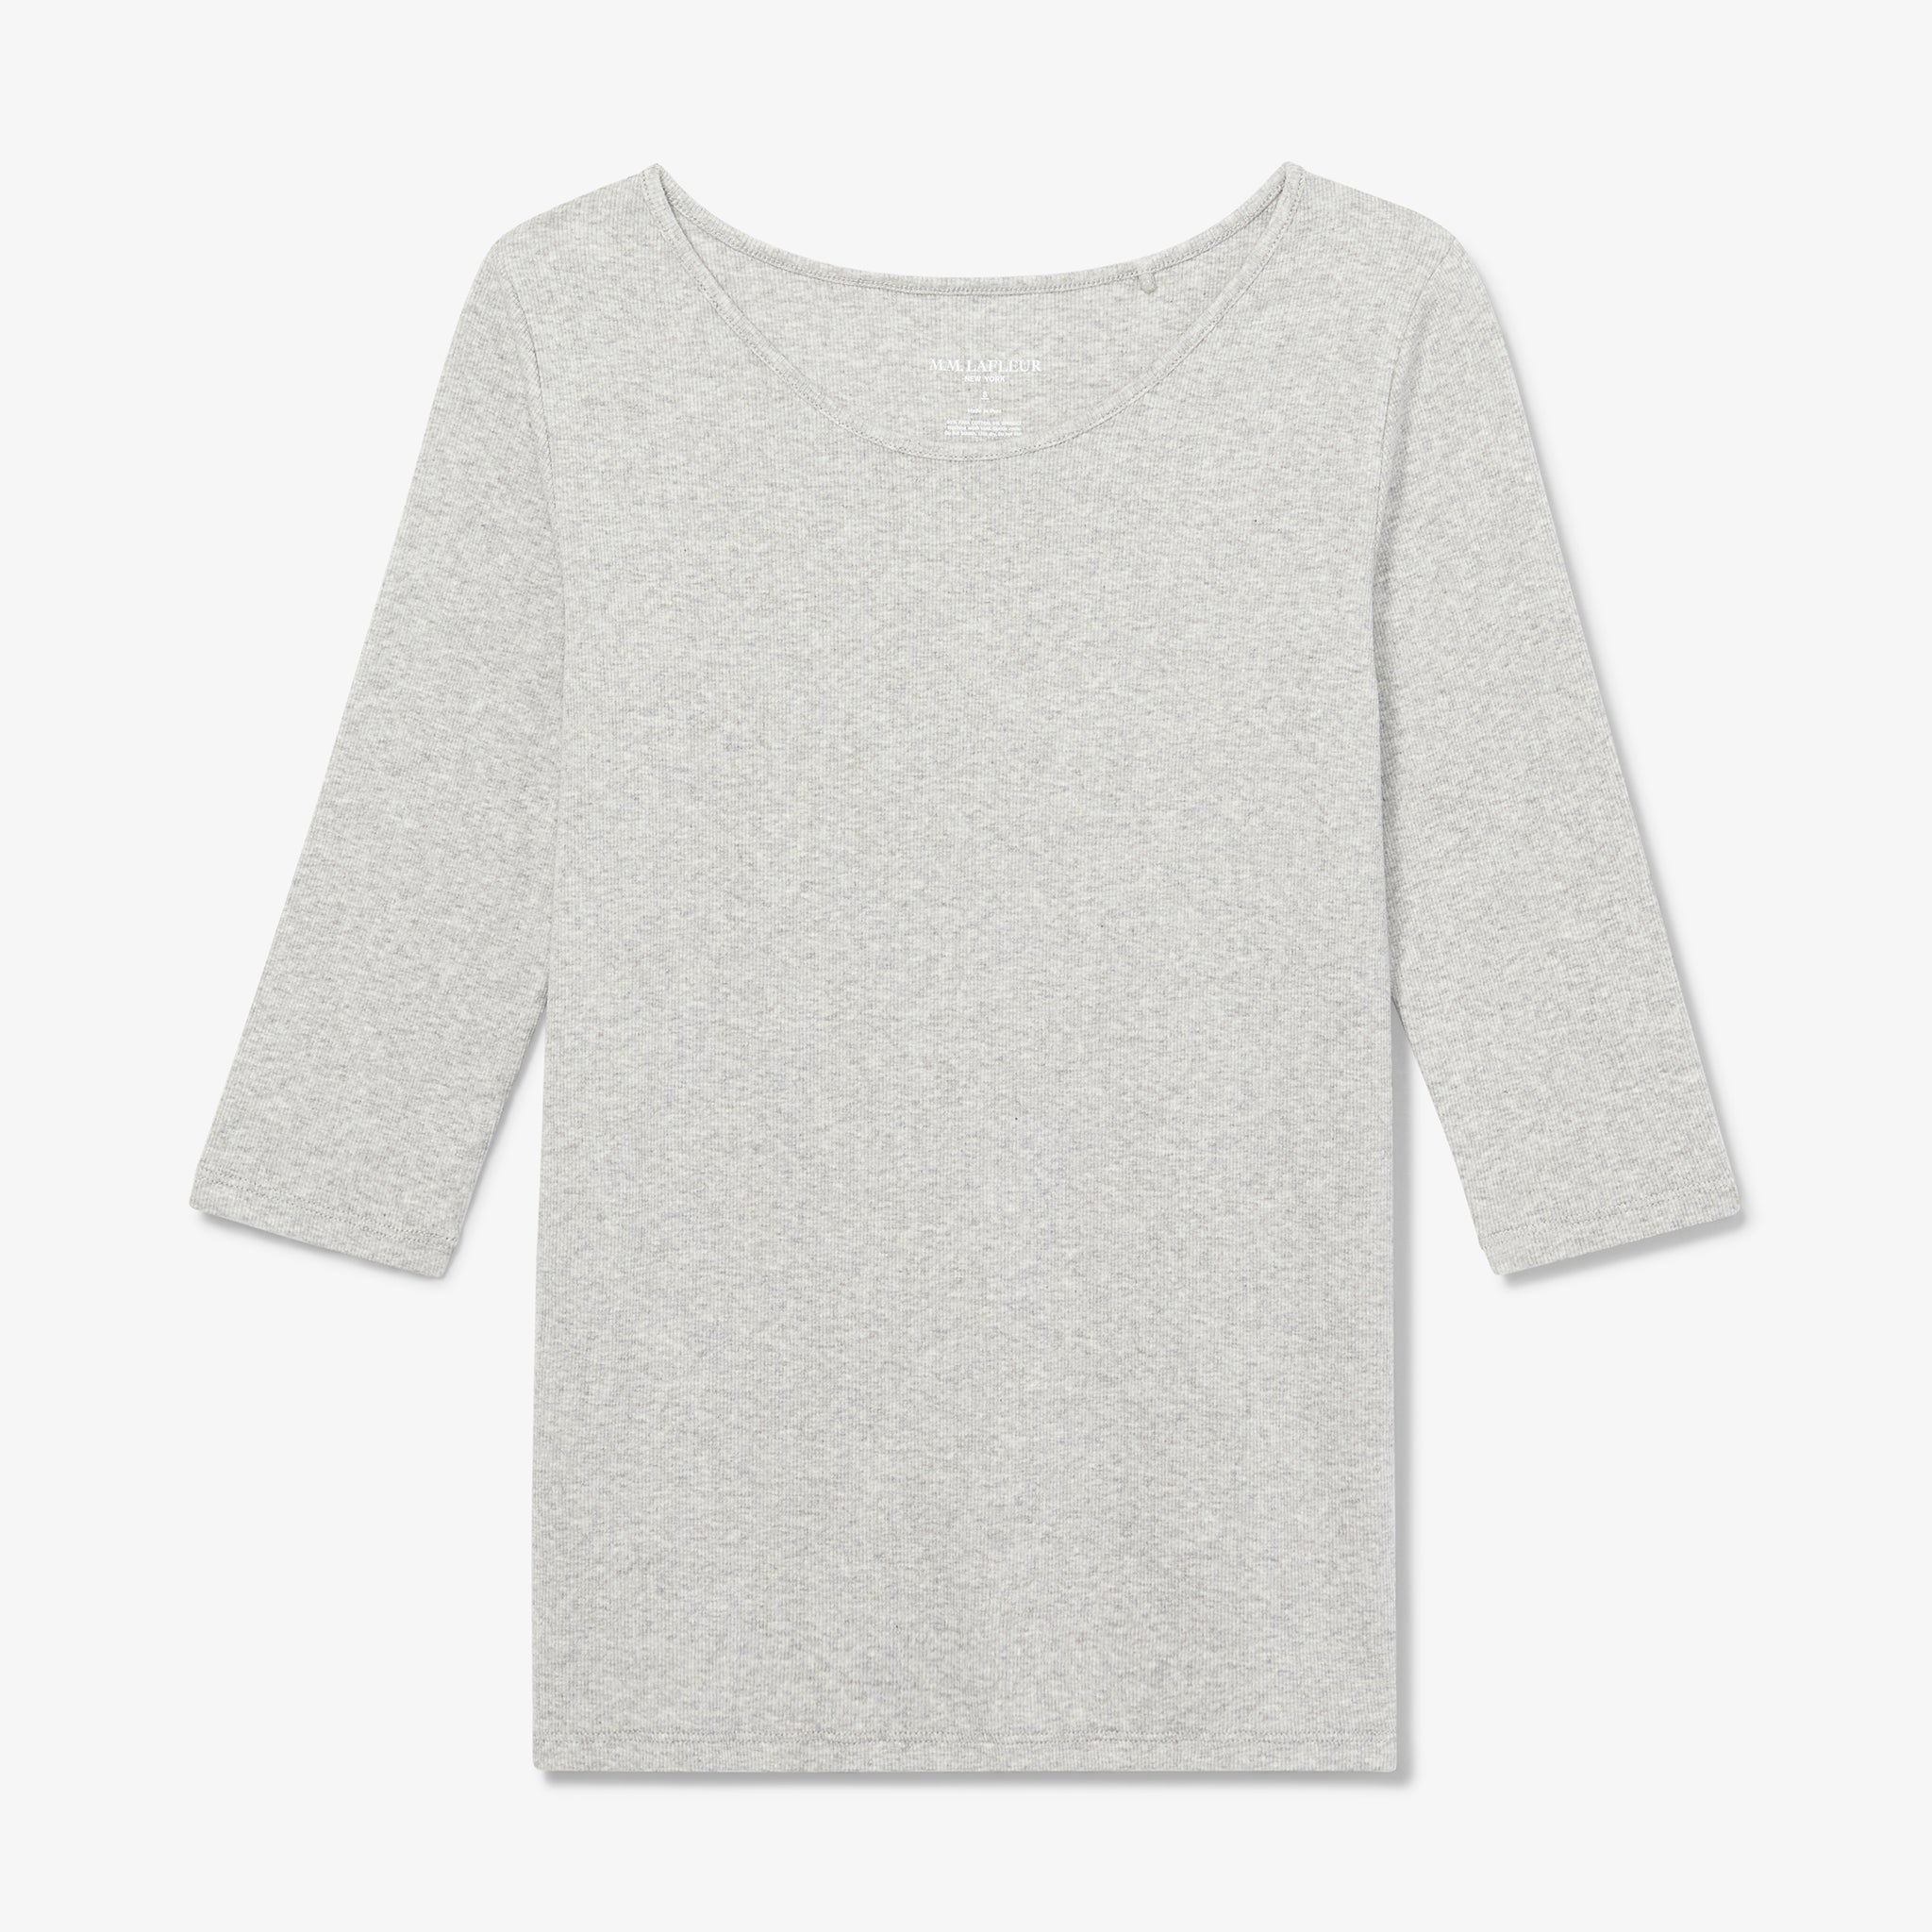 Packshot image of the Soyoung T-Shirt - Ribbed Pima Cotton in Gray Melange